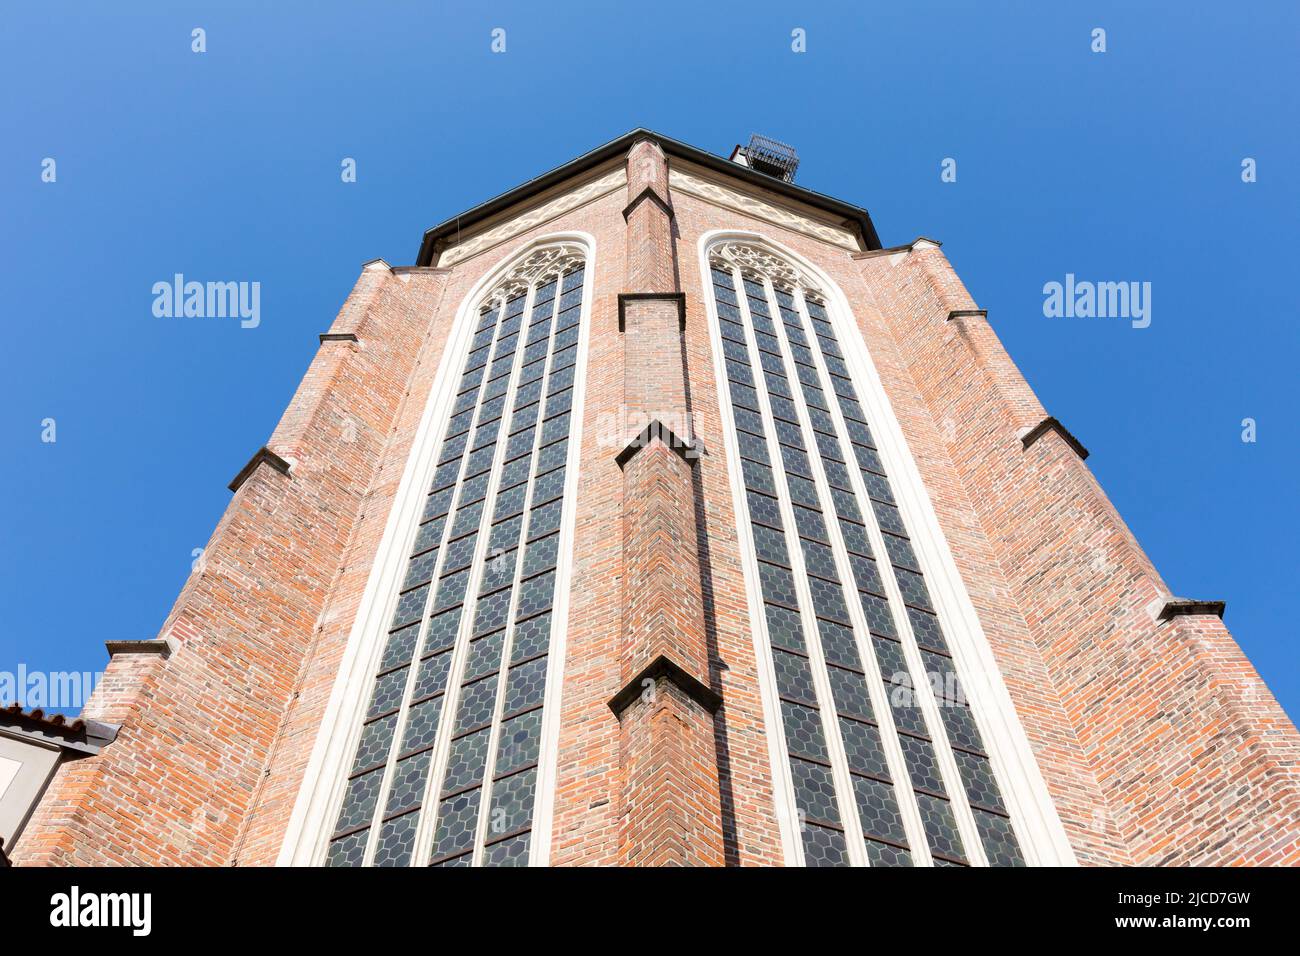 Landshut, Germany - Aug 14, 2021: View upwards at the facade of church St. Martin. Stock Photo